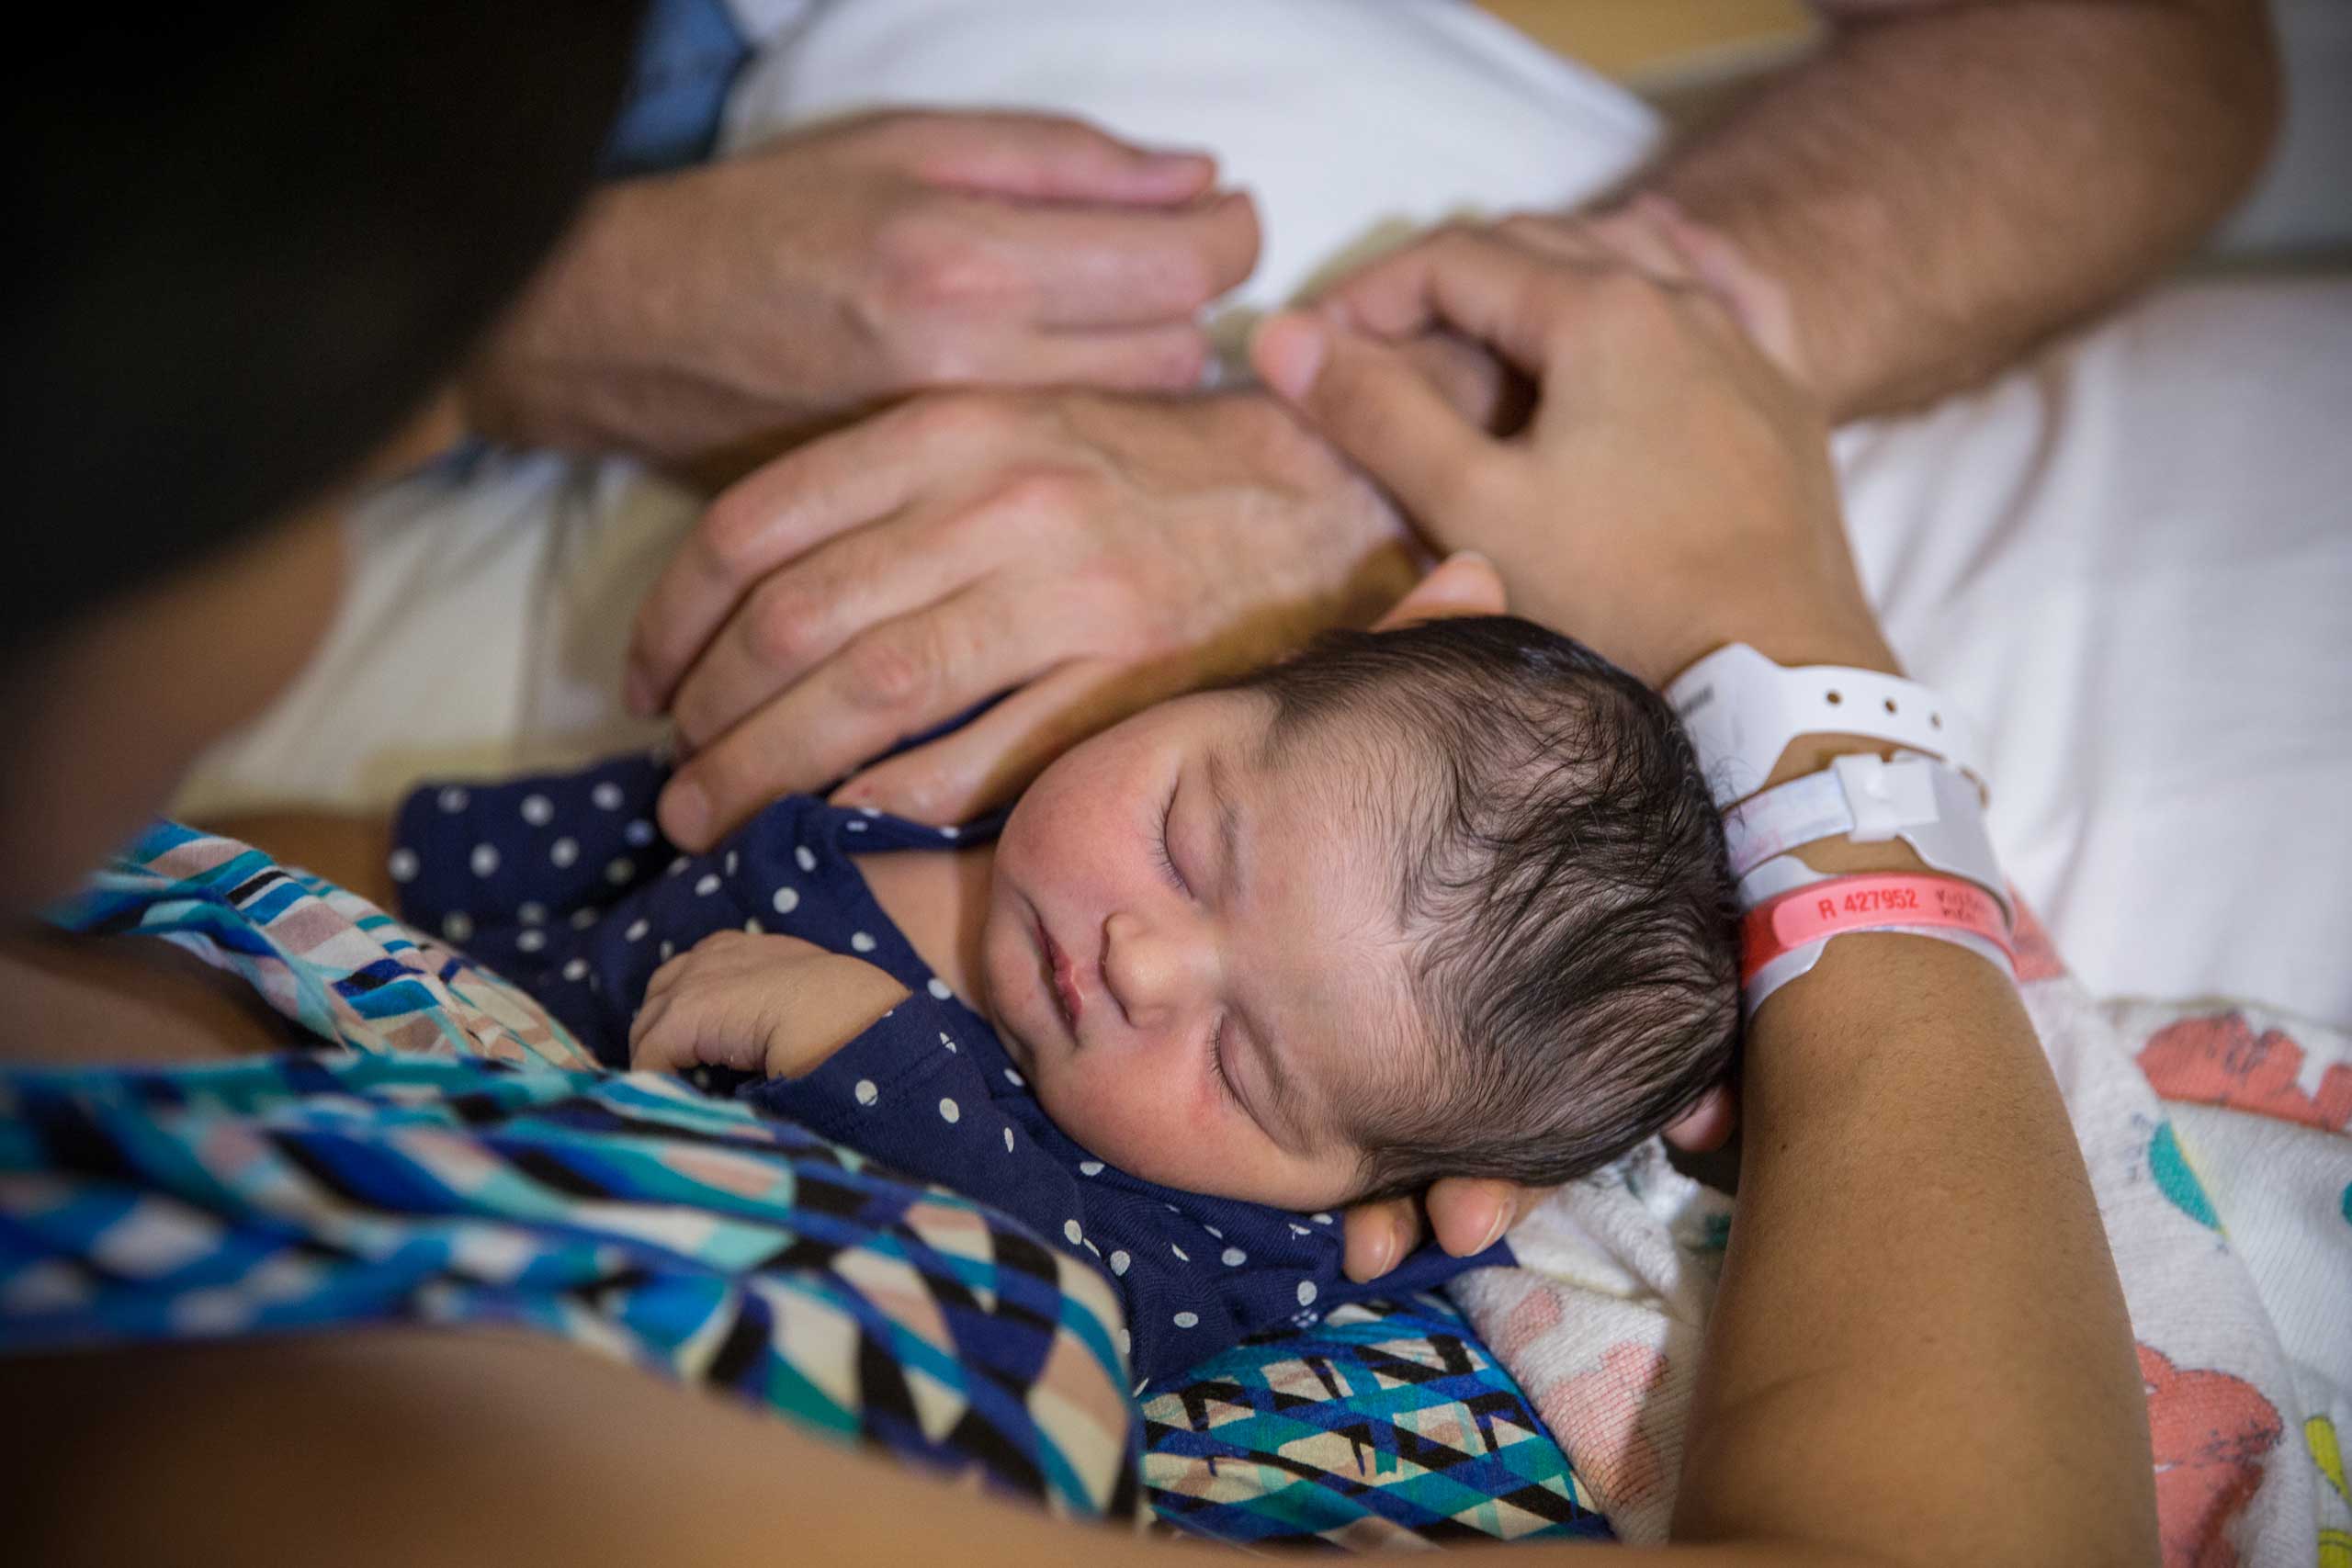 A three-day old baby girl at Shady Grove Adventist Hospital, in Rockville, Maryland, Sept. 5, 2014. (Evelyn Hockstein—The Washington Post/Getty Images)